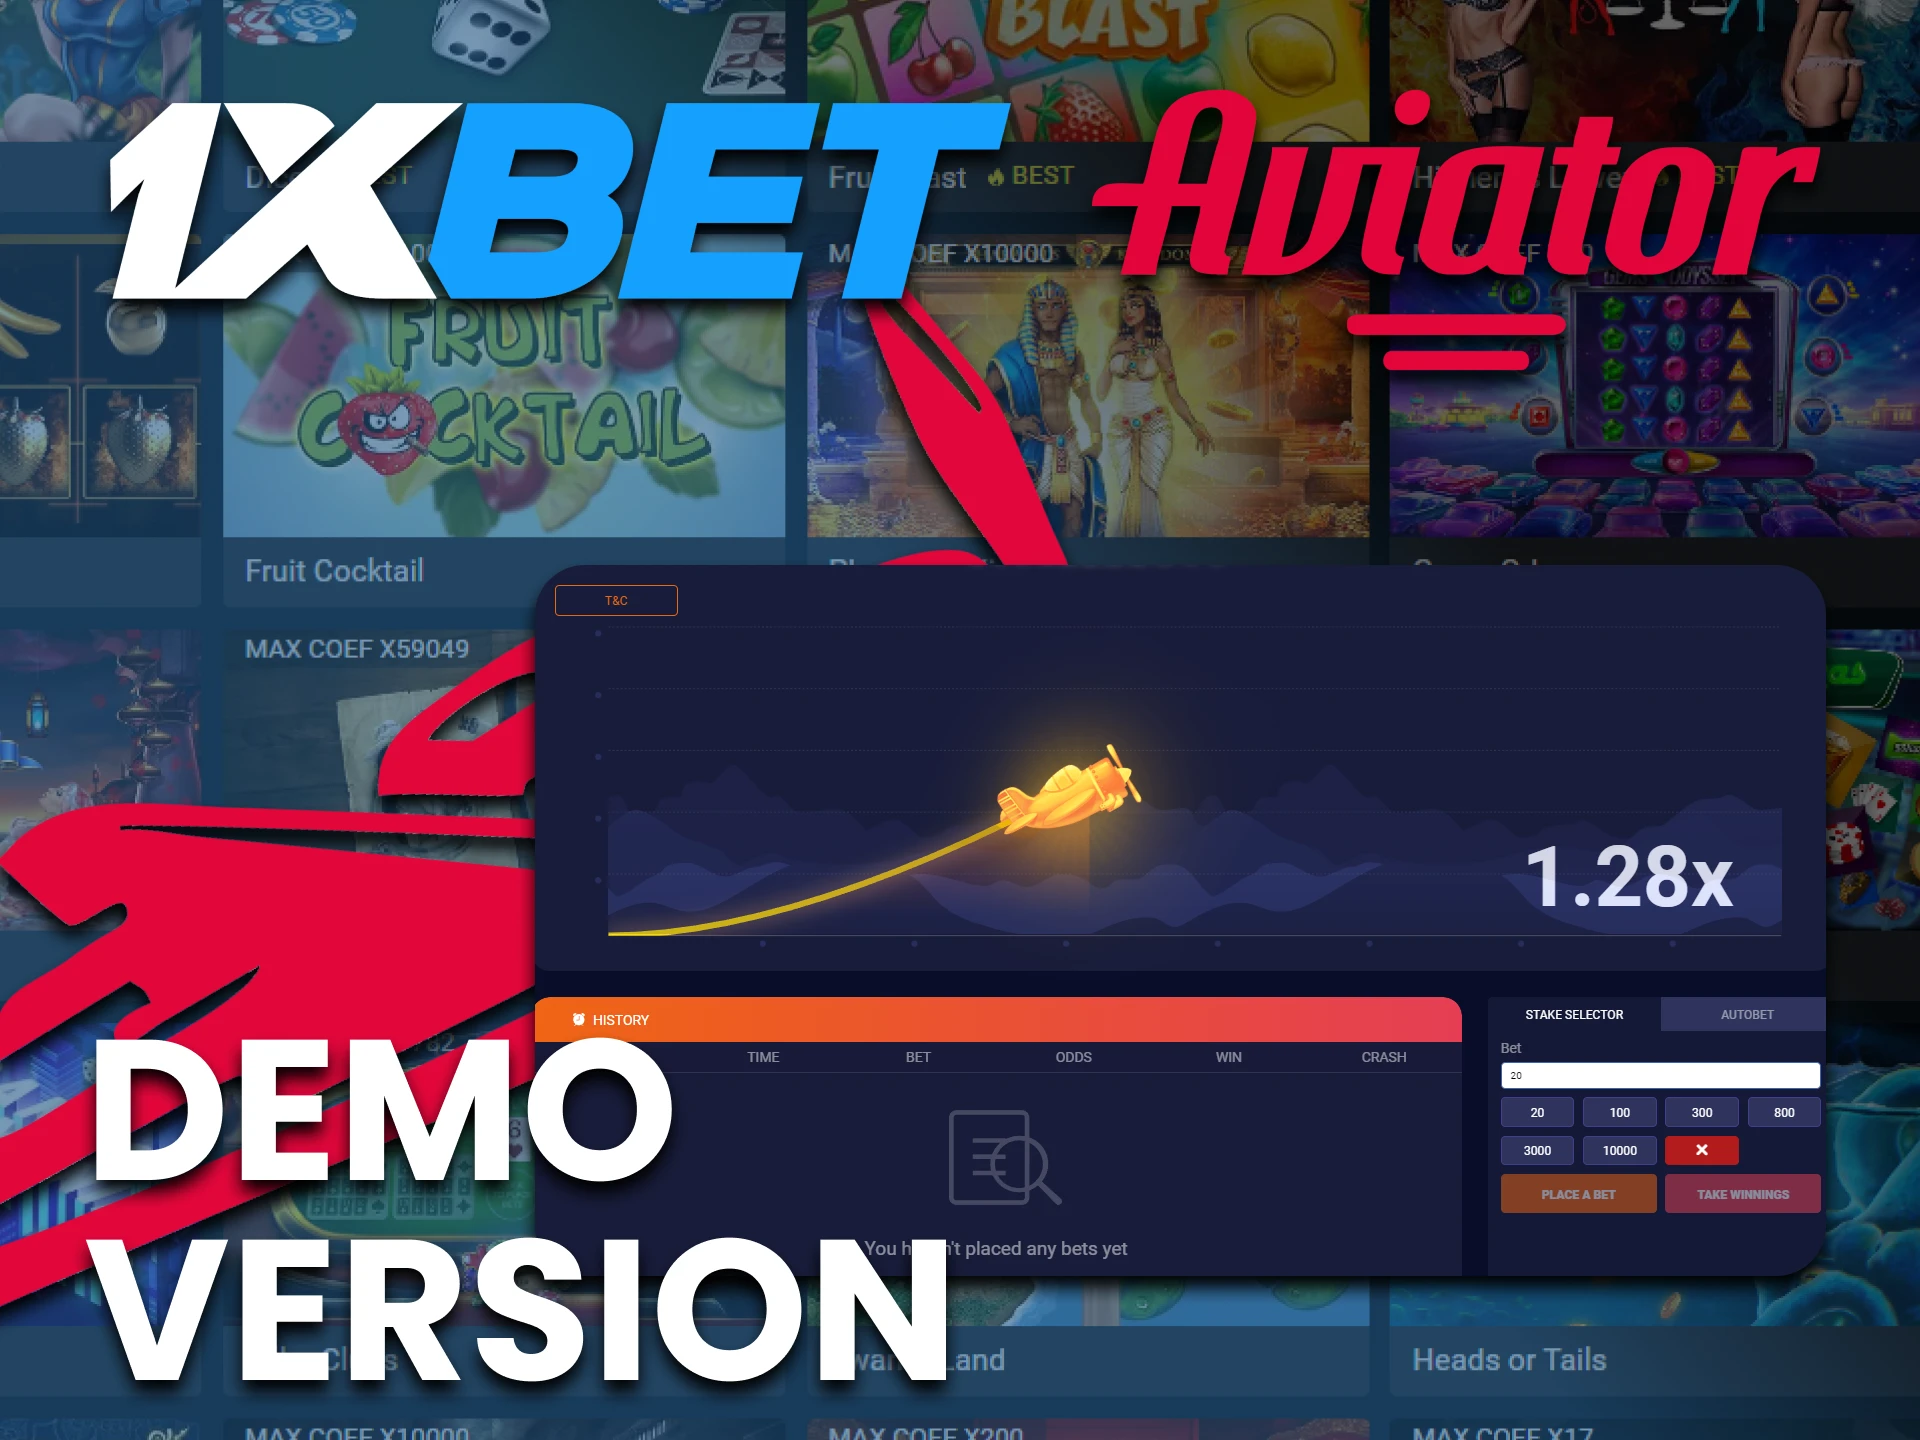 You can play the 1xbet Aviator game with no real bets.